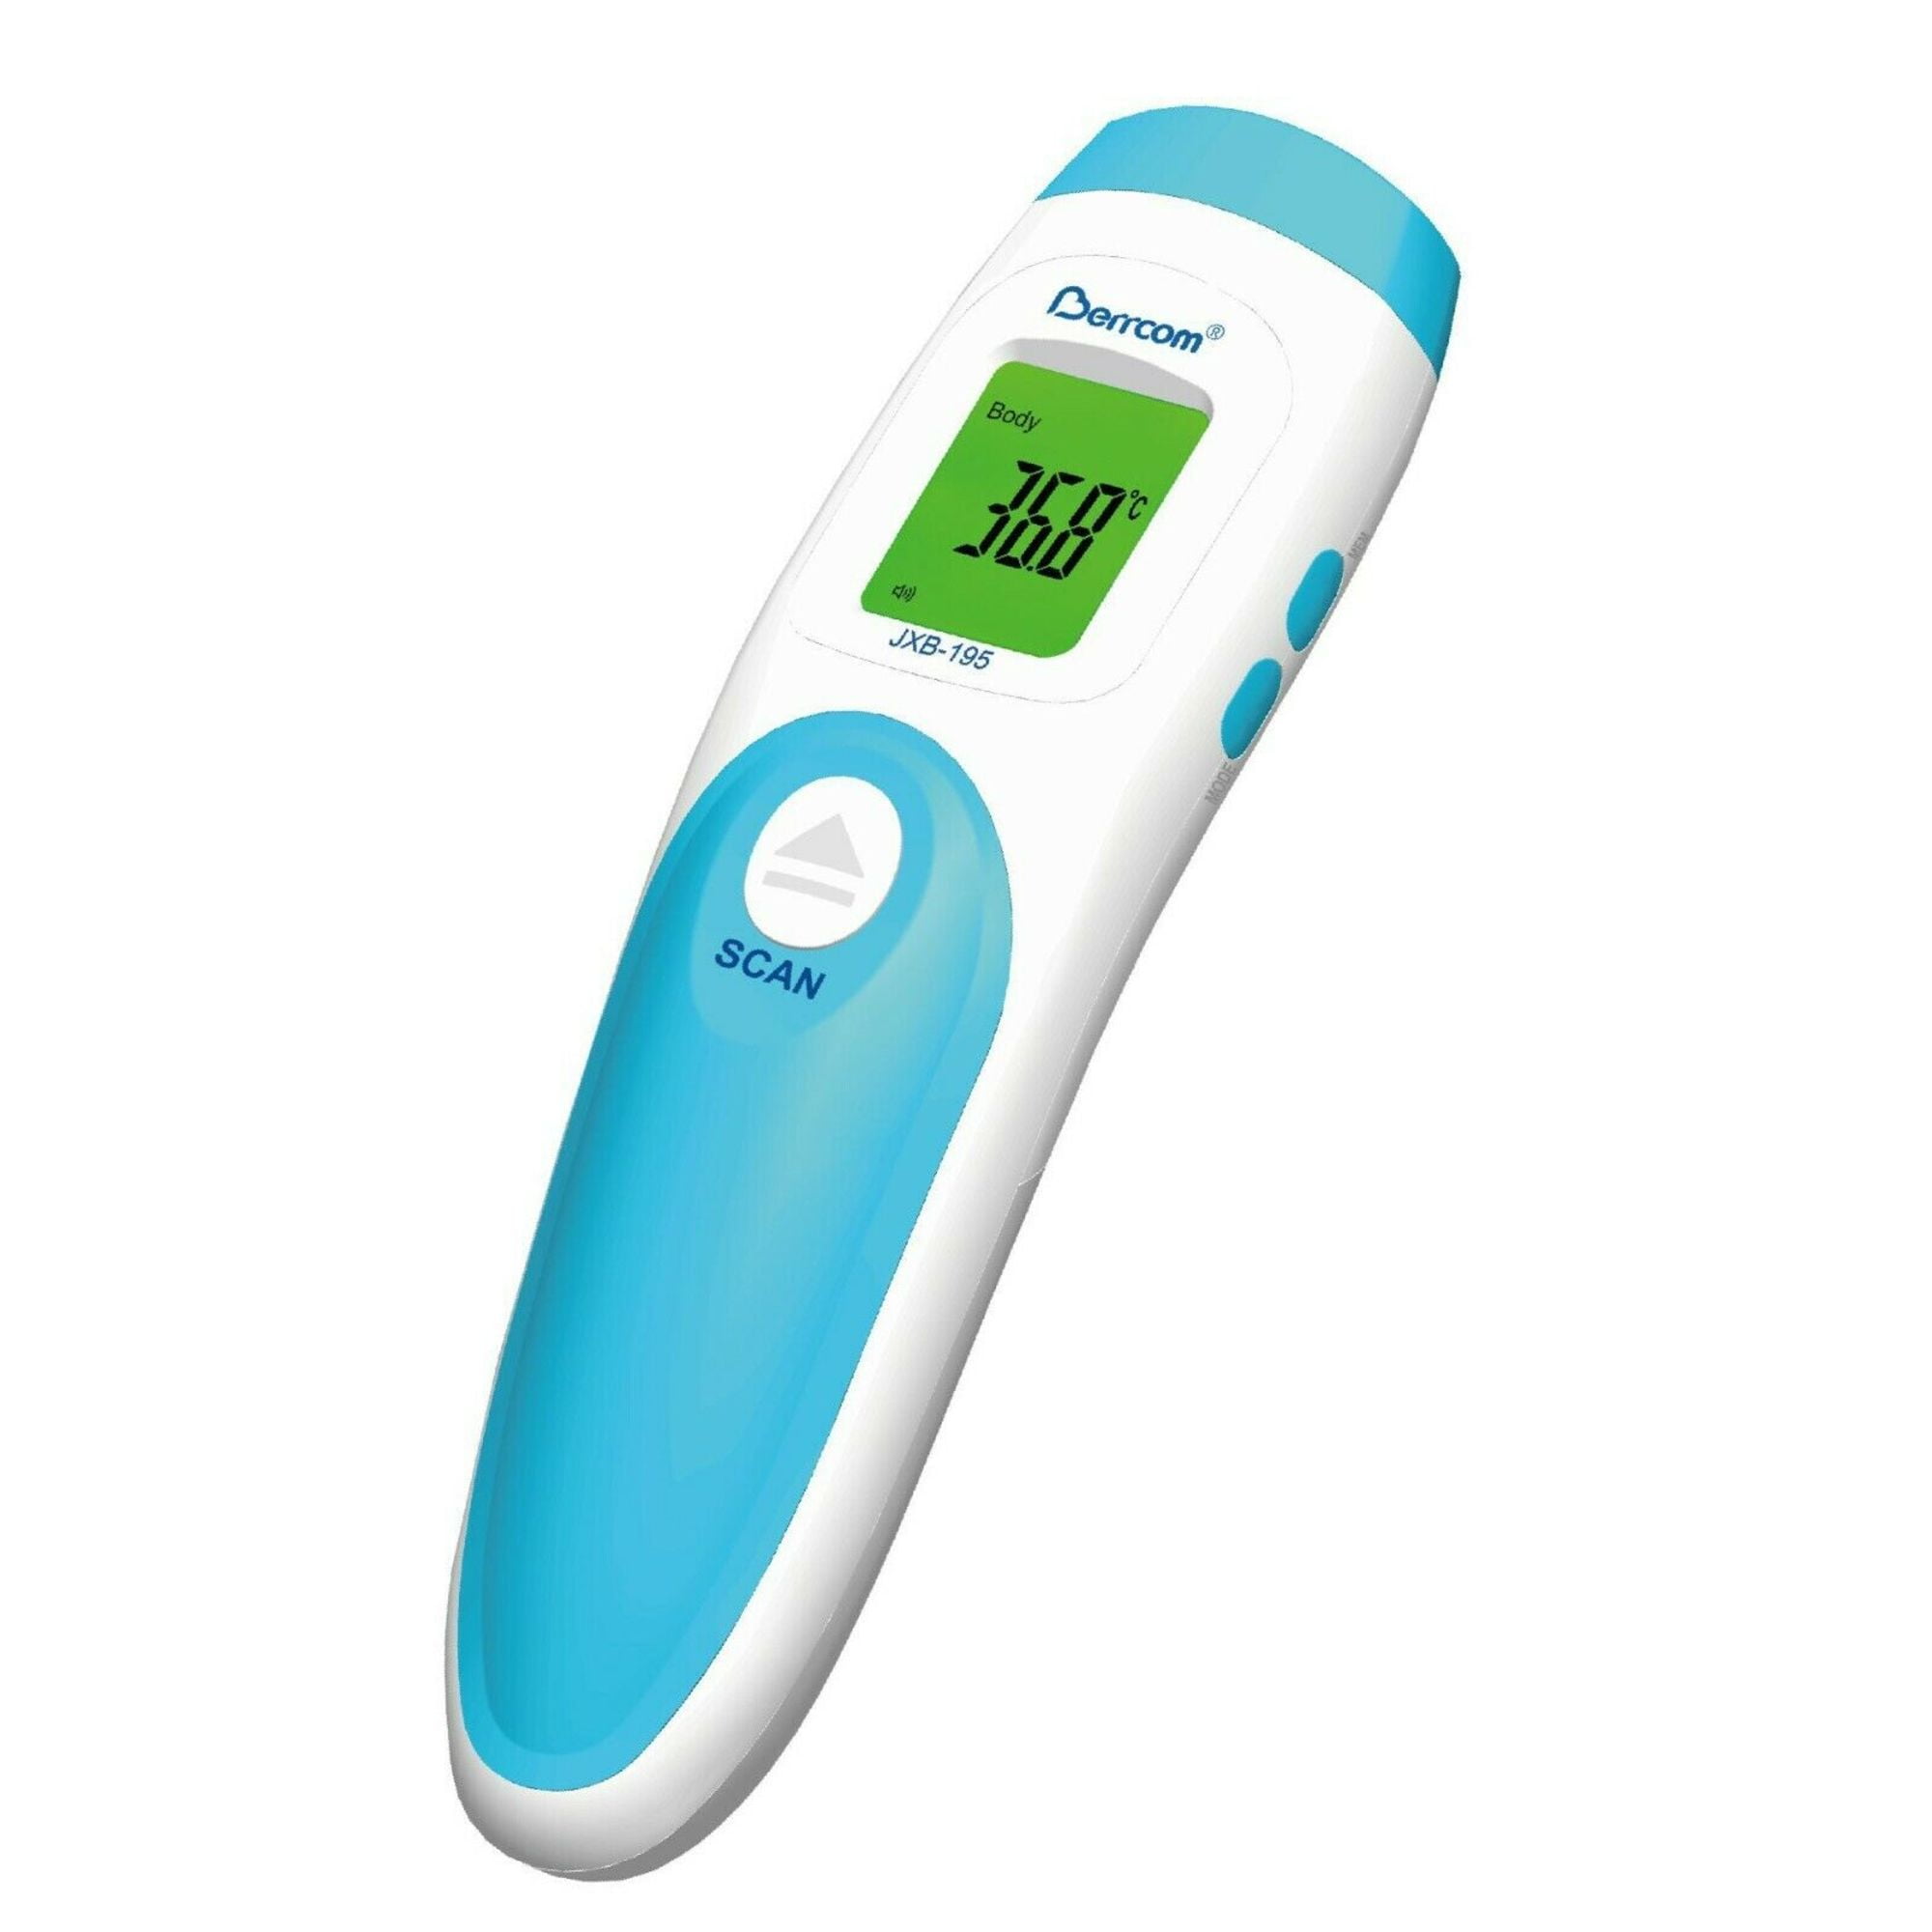 Berrcom Gun Non Contact Infrared Forehead Thermometer Medical Grade Baby Adult 